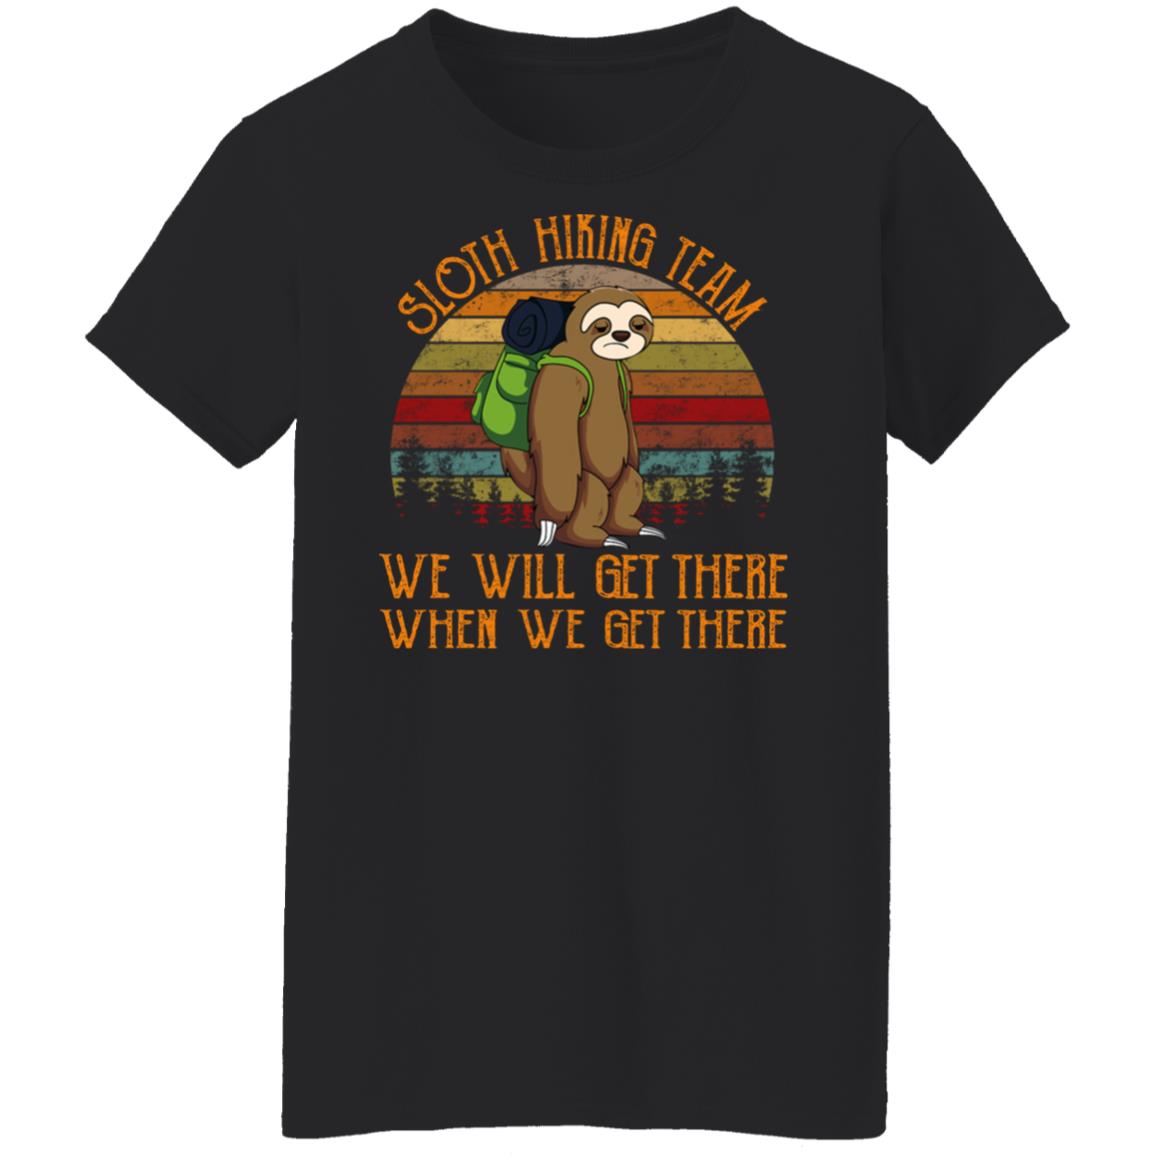 Sloth Hiking Team - We Will Get There When We Get There Shirt